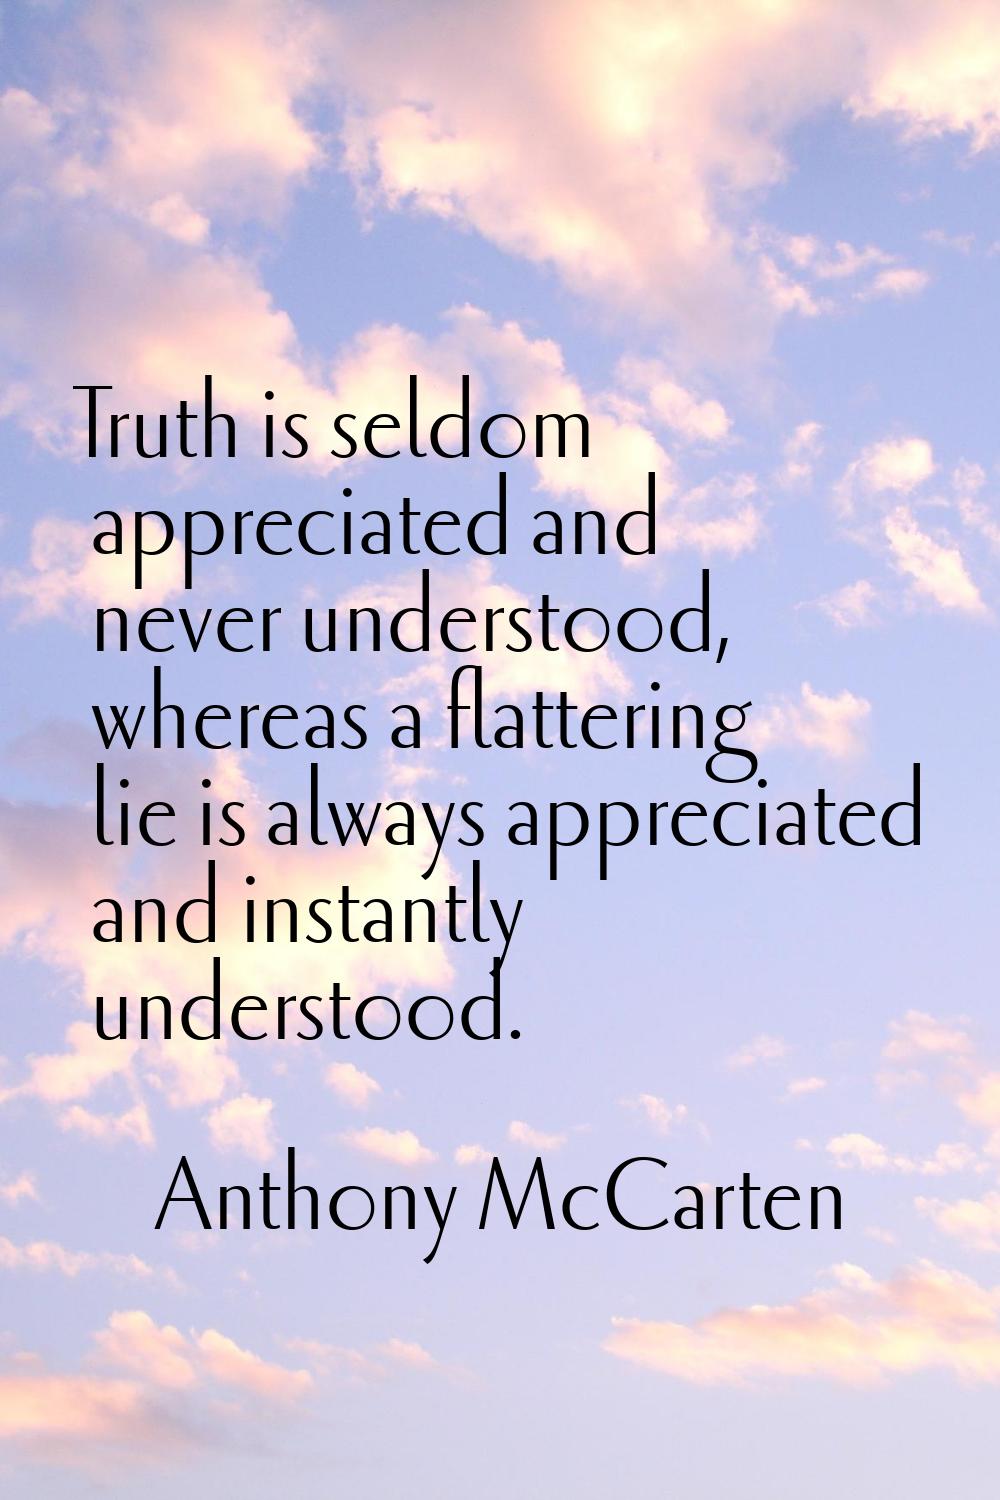 Truth is seldom appreciated and never understood, whereas a flattering lie is always appreciated an